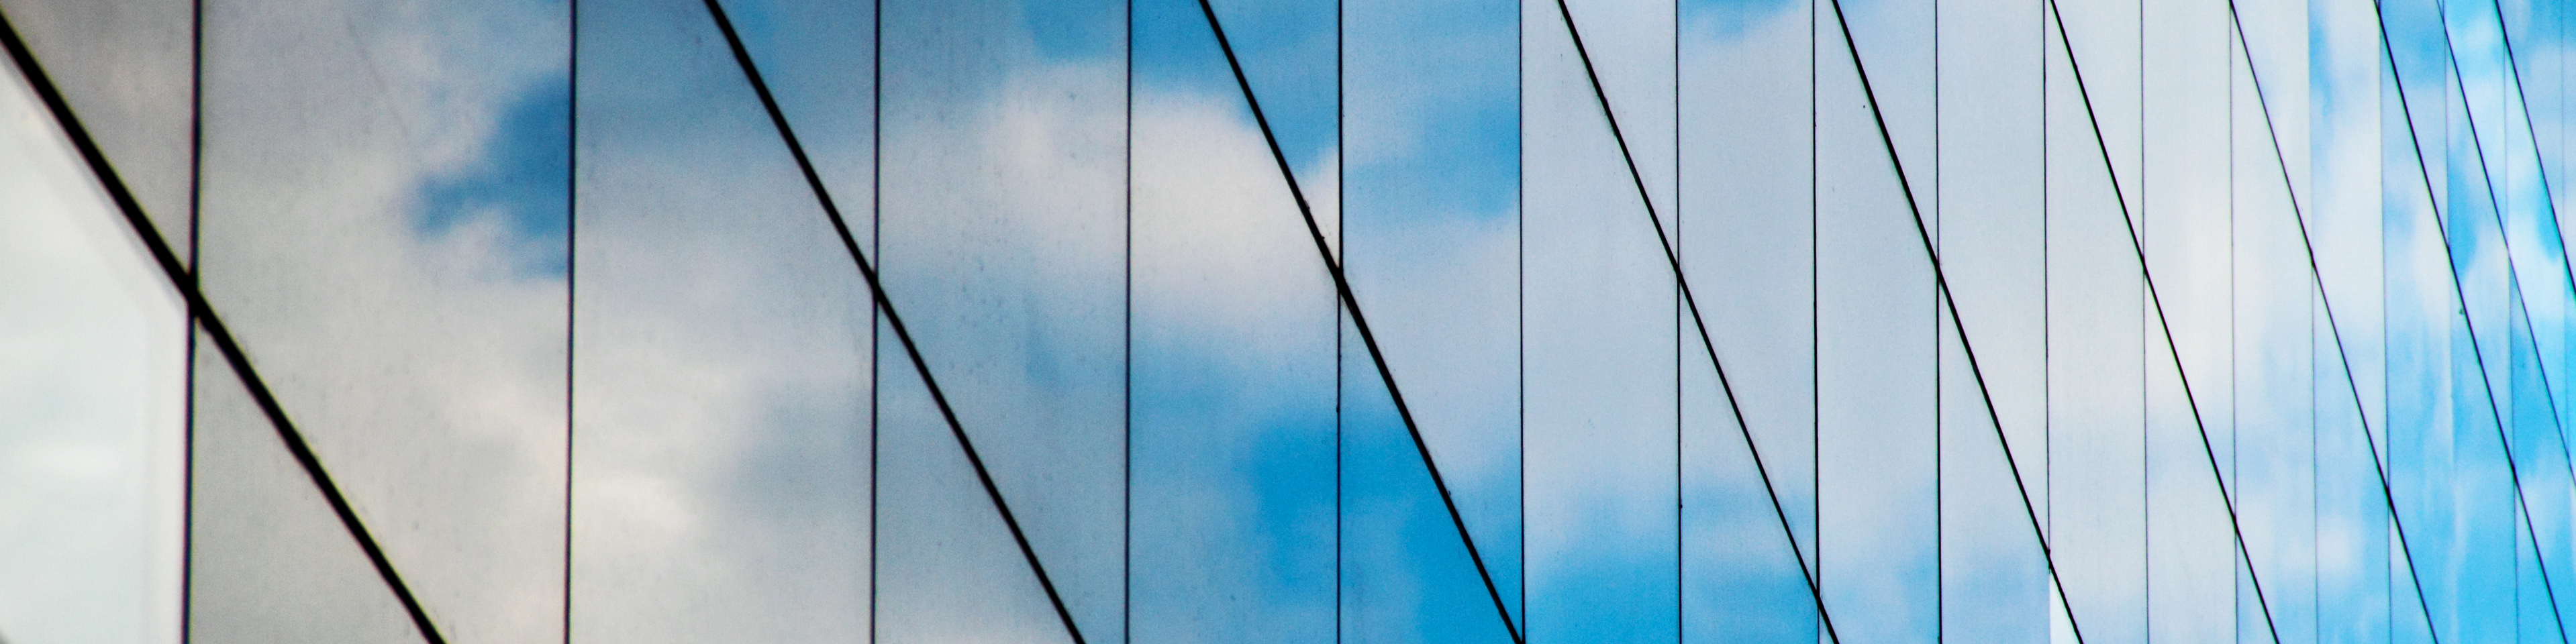 A reflection of clouds and sky in a mirrored glass building.